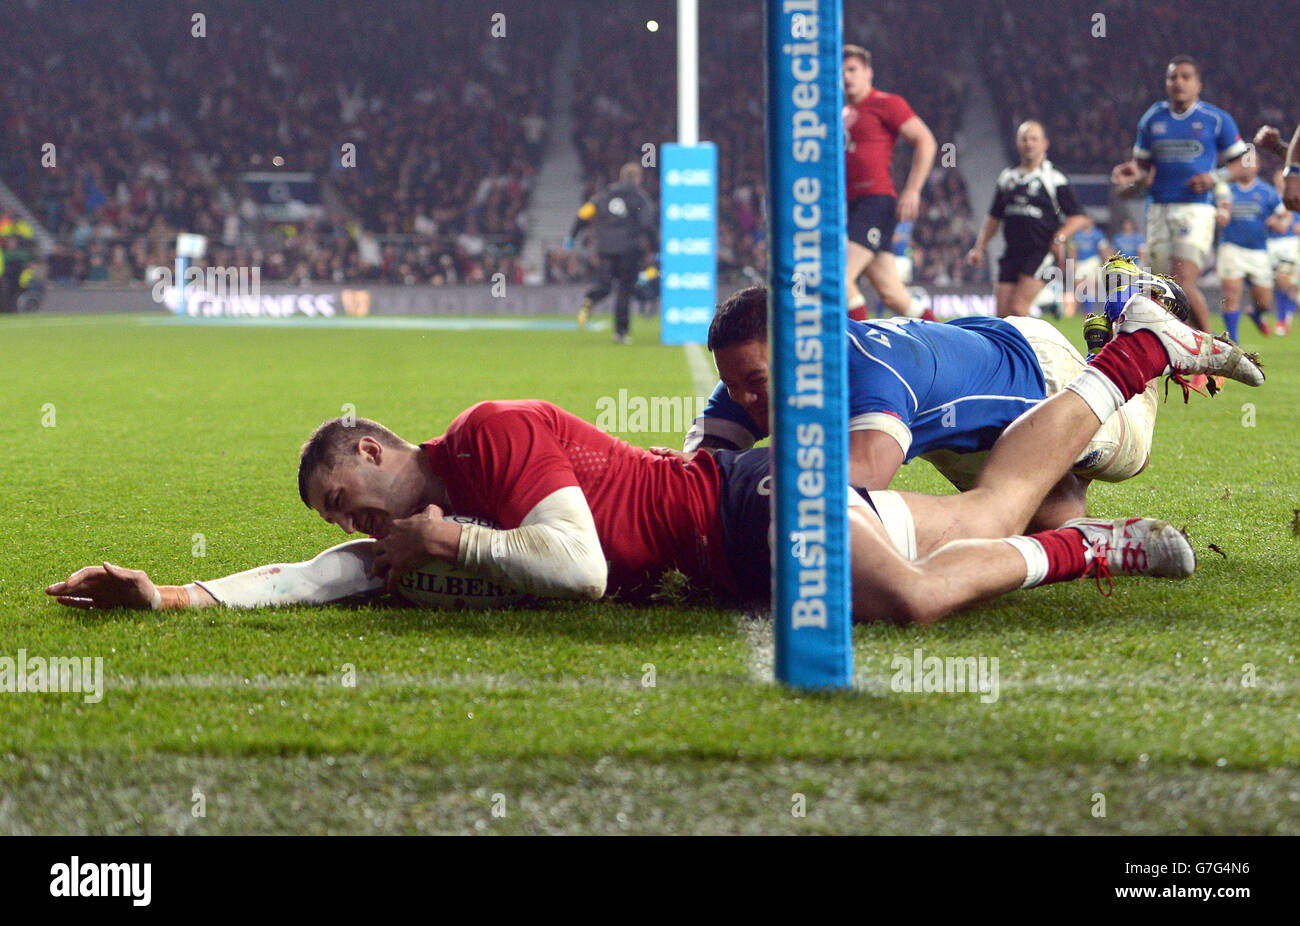 England's Jonny May scores his second try during the QBE International match at Twickenham, London. Stock Photo